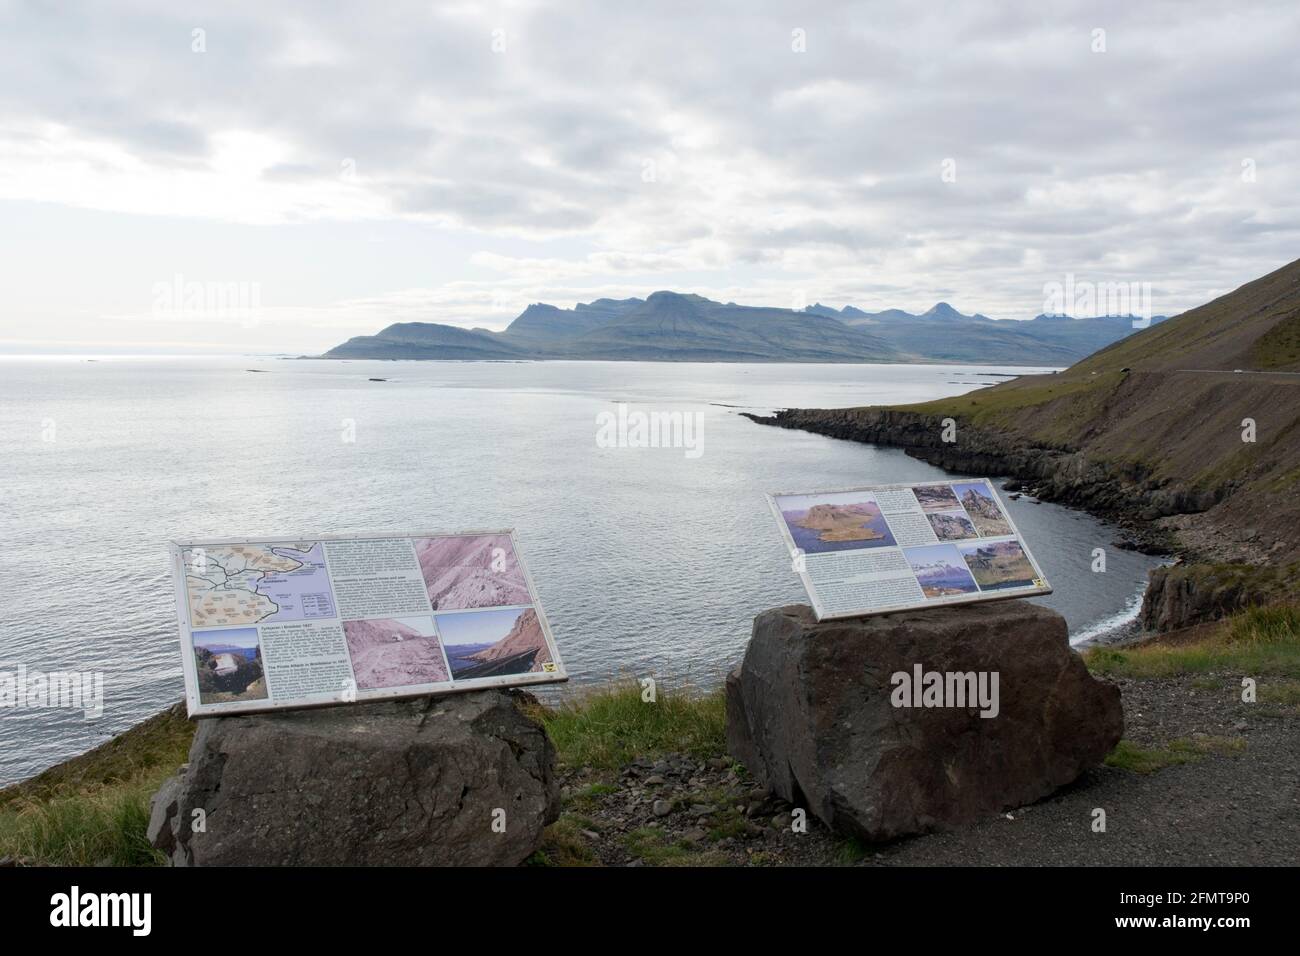 An informational sign describes the geology of East Iceland at the Kambanes peninsula, south of the village of Stodvarfjordur, Iceland. Stock Photo